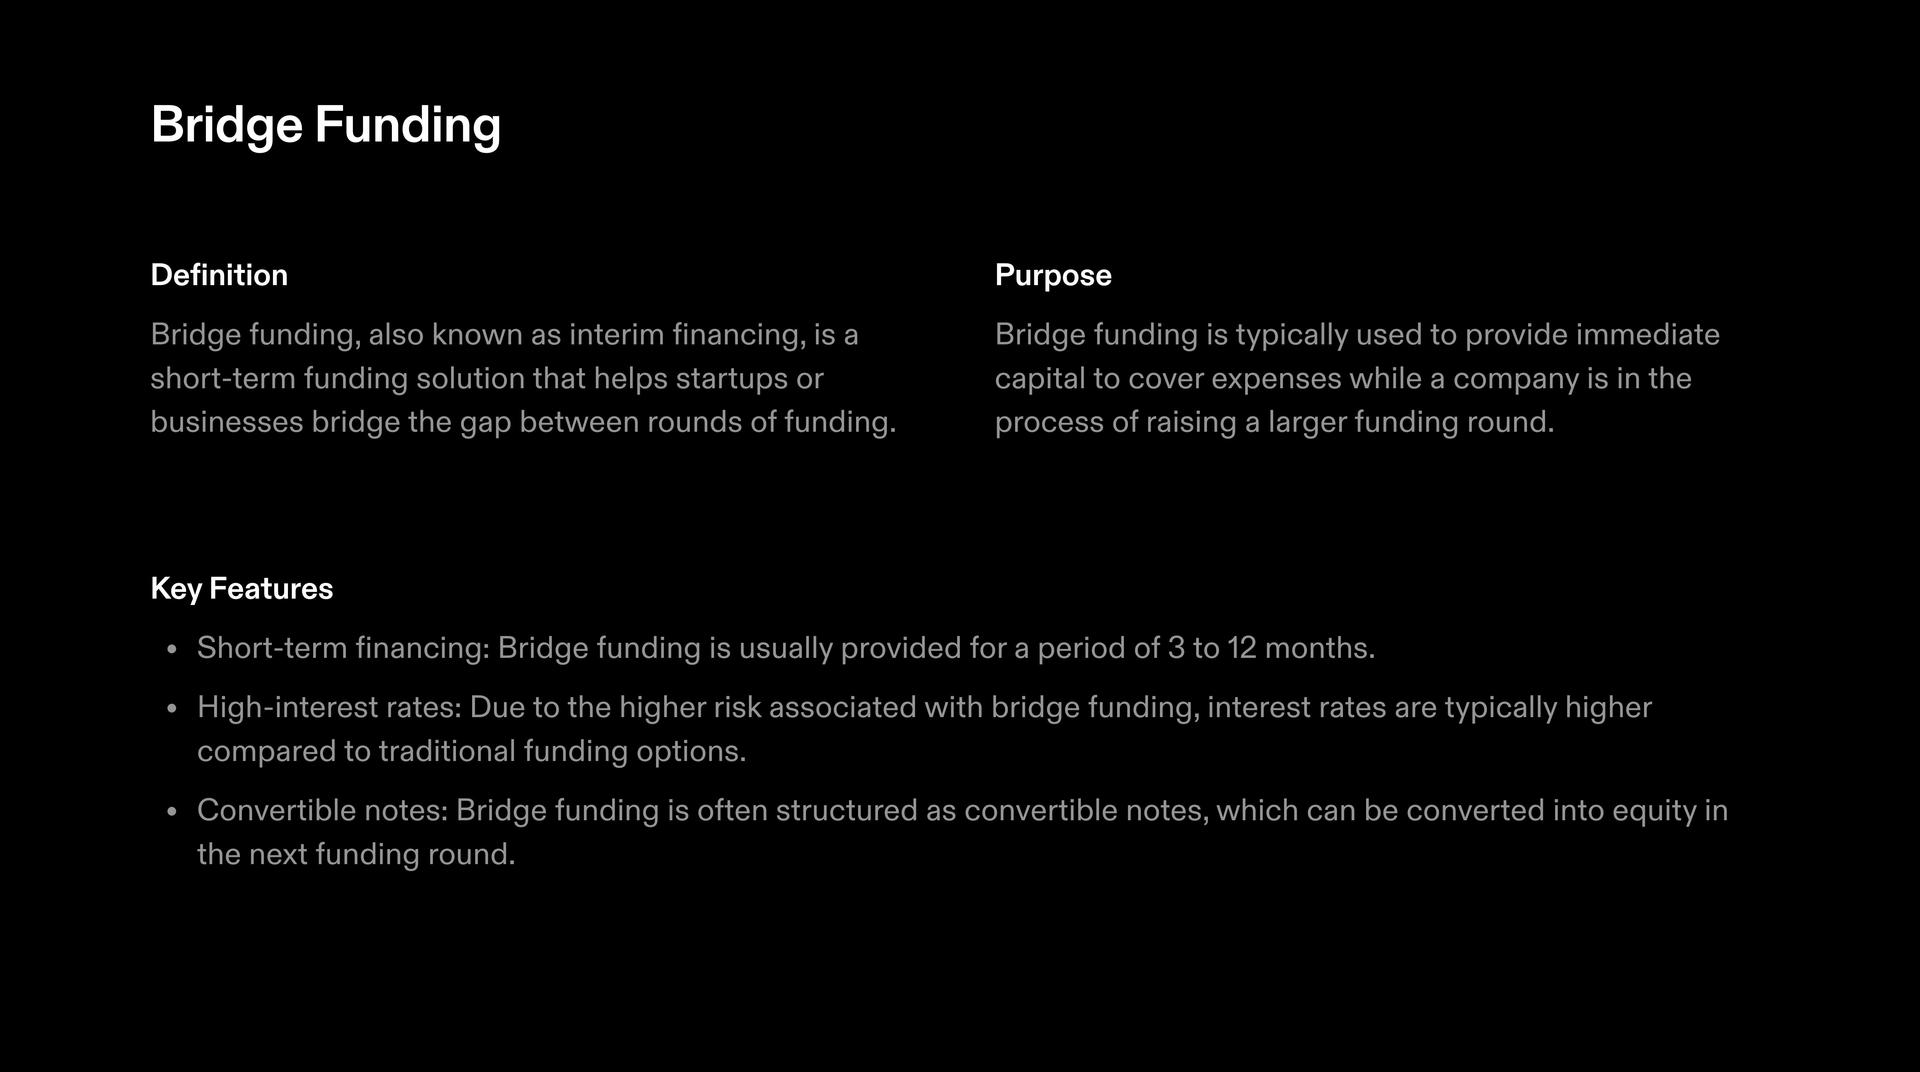 Image with definition, purpose and key features about Bridge funding for your startup